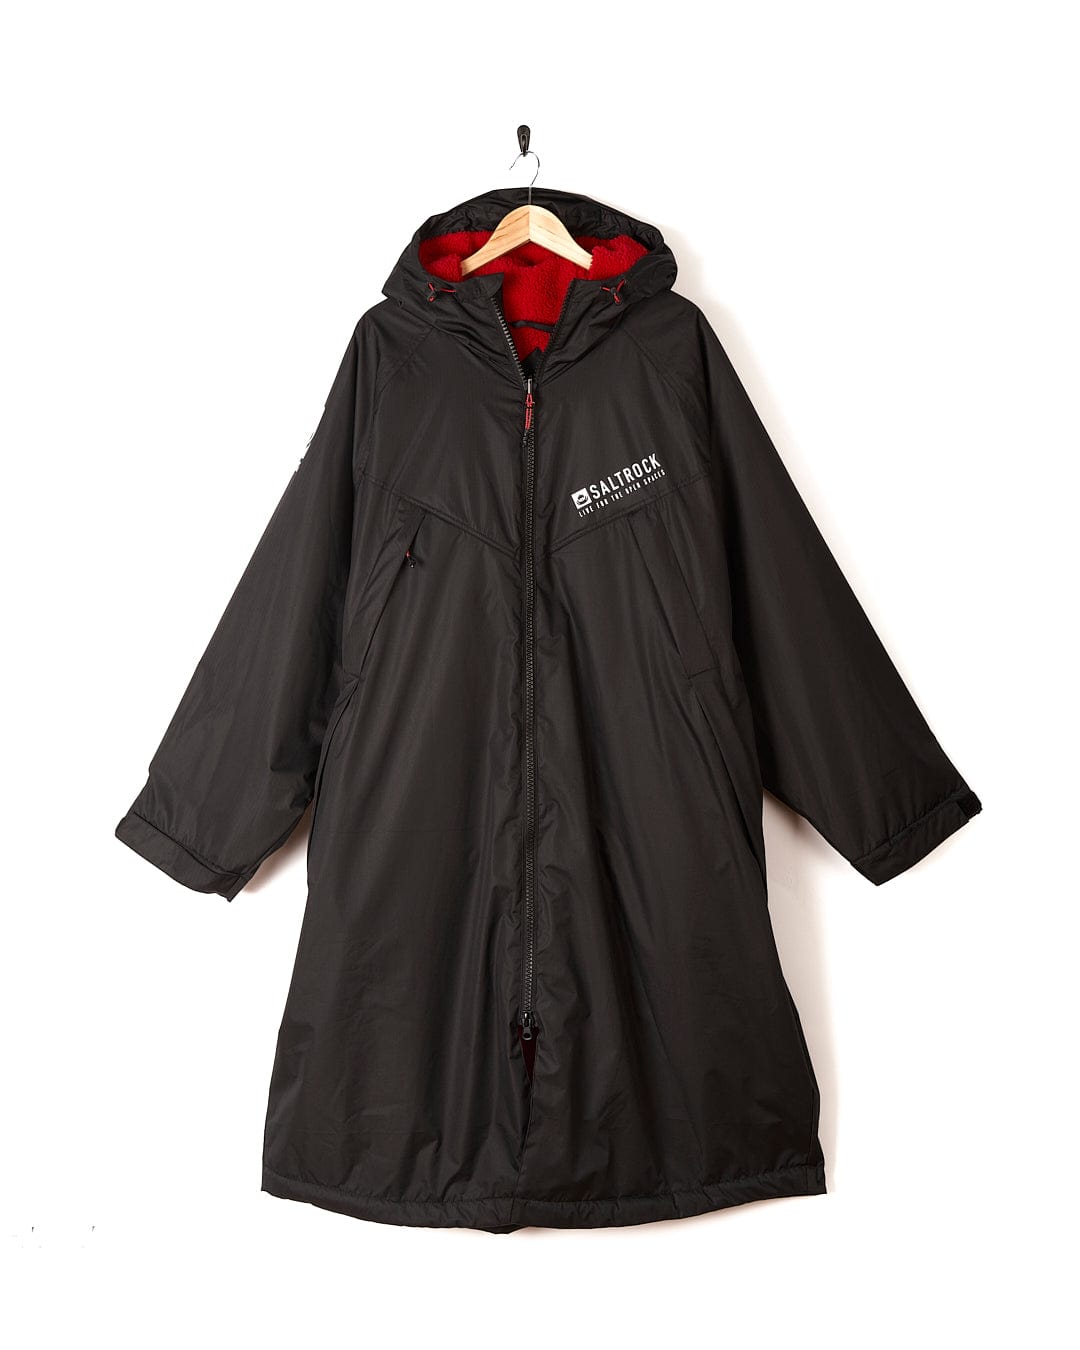 A Saltrock Four Seasons - Waterproof Changing Robe - Black/Red hooded raincoat hanging on a wall.